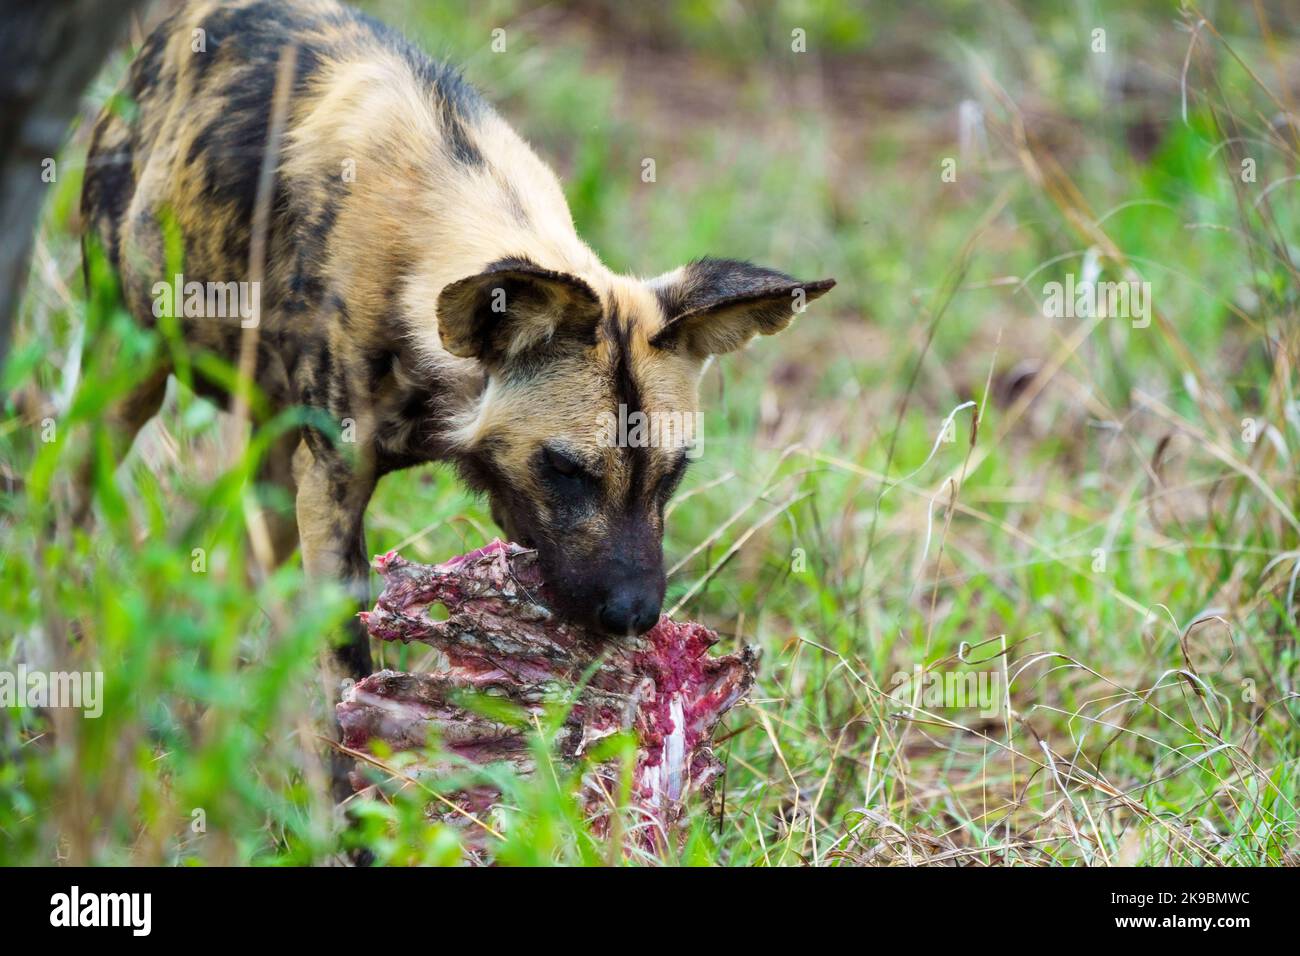 African wild dog, African painted dog, painted wolf or African hunting dog (Lycaon pictus). Mpumalanga. South Africa. Stock Photo